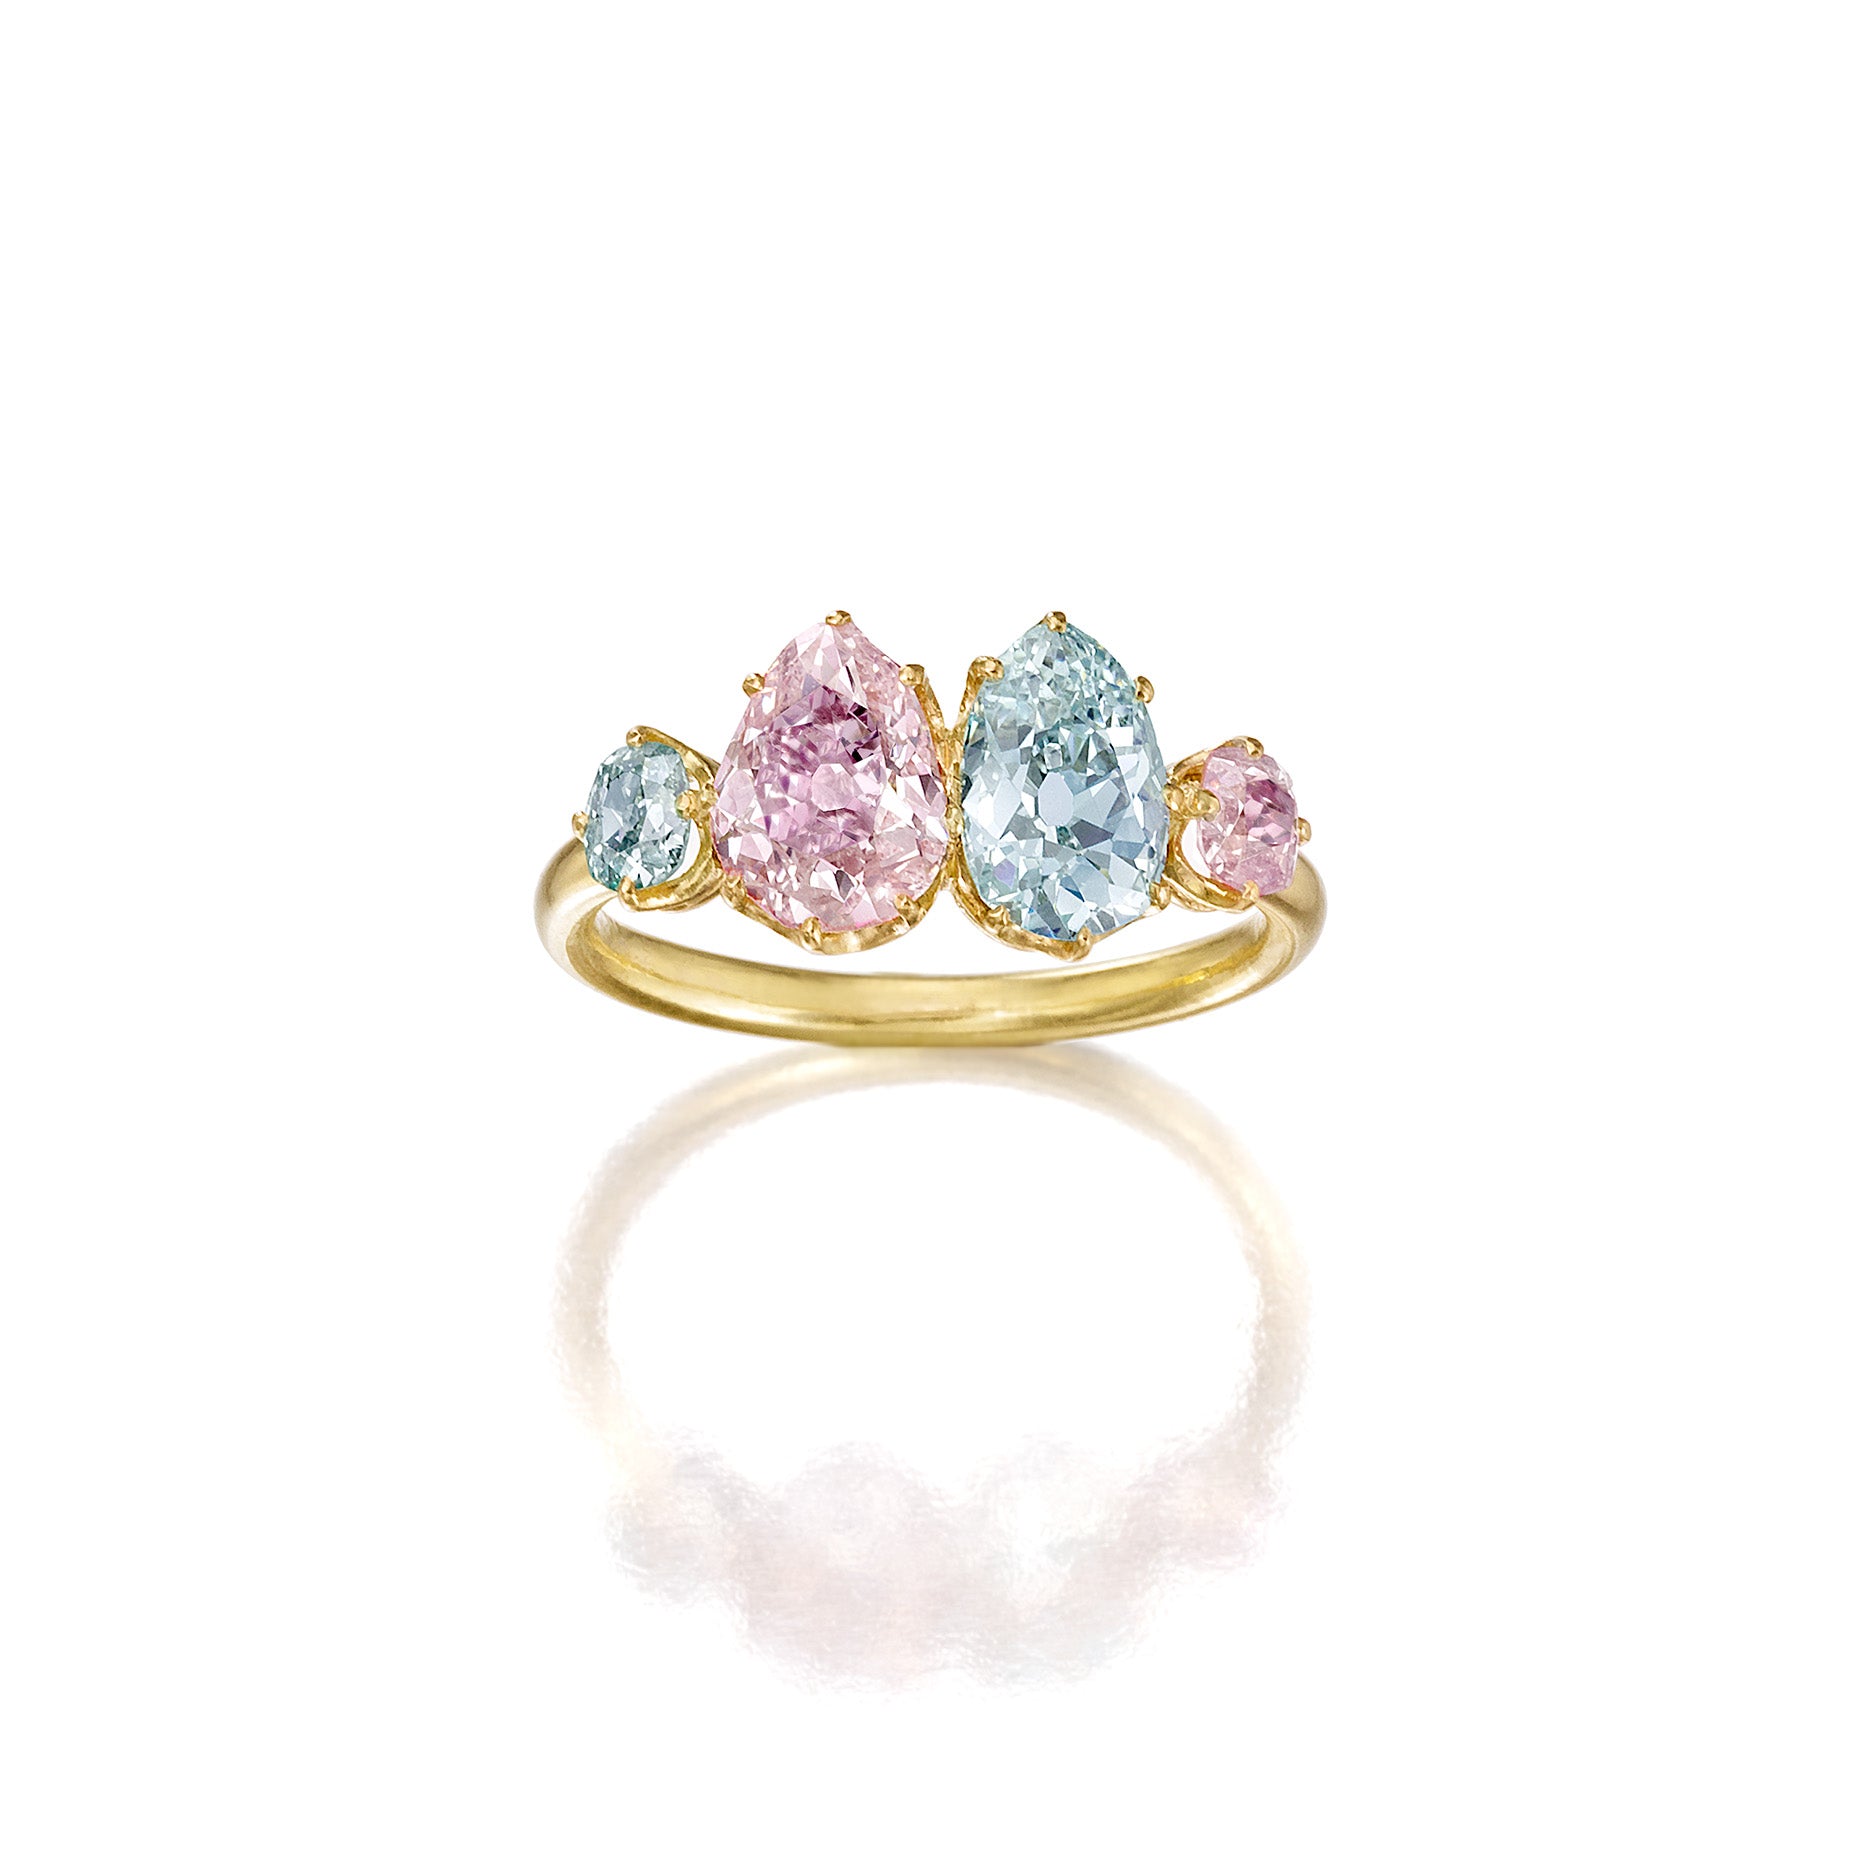 PINK  AND  BLUE-GREEN  DIAMOND  RING,  FRENCH,  CIRCA  1880